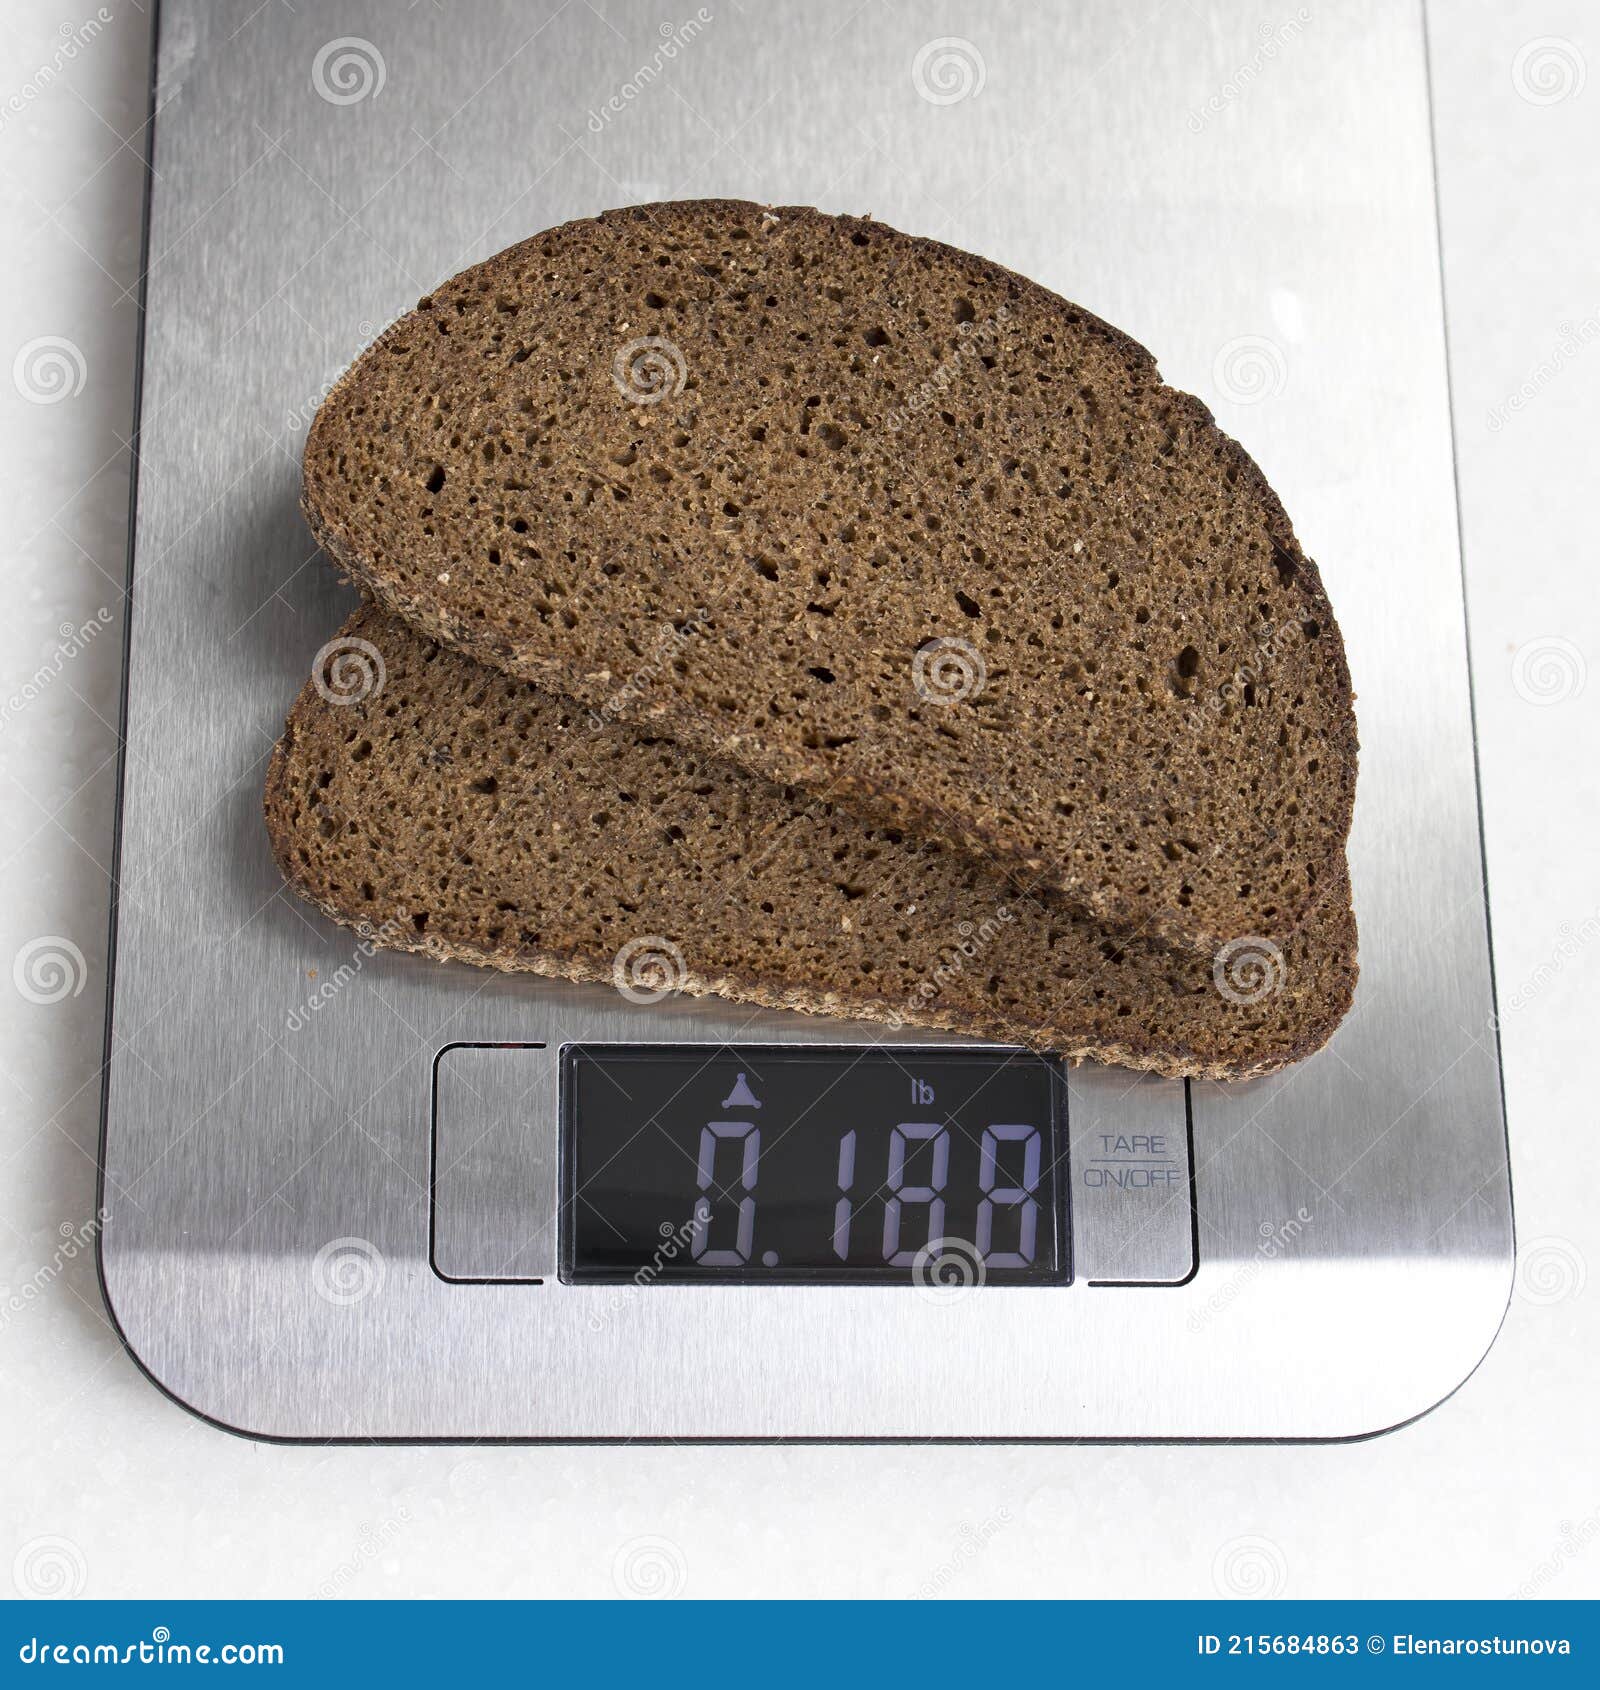 https://thumbs.dreamstime.com/z/two-pieces-rye-bread-weighed-kitchen-scale-diet-215684863.jpg